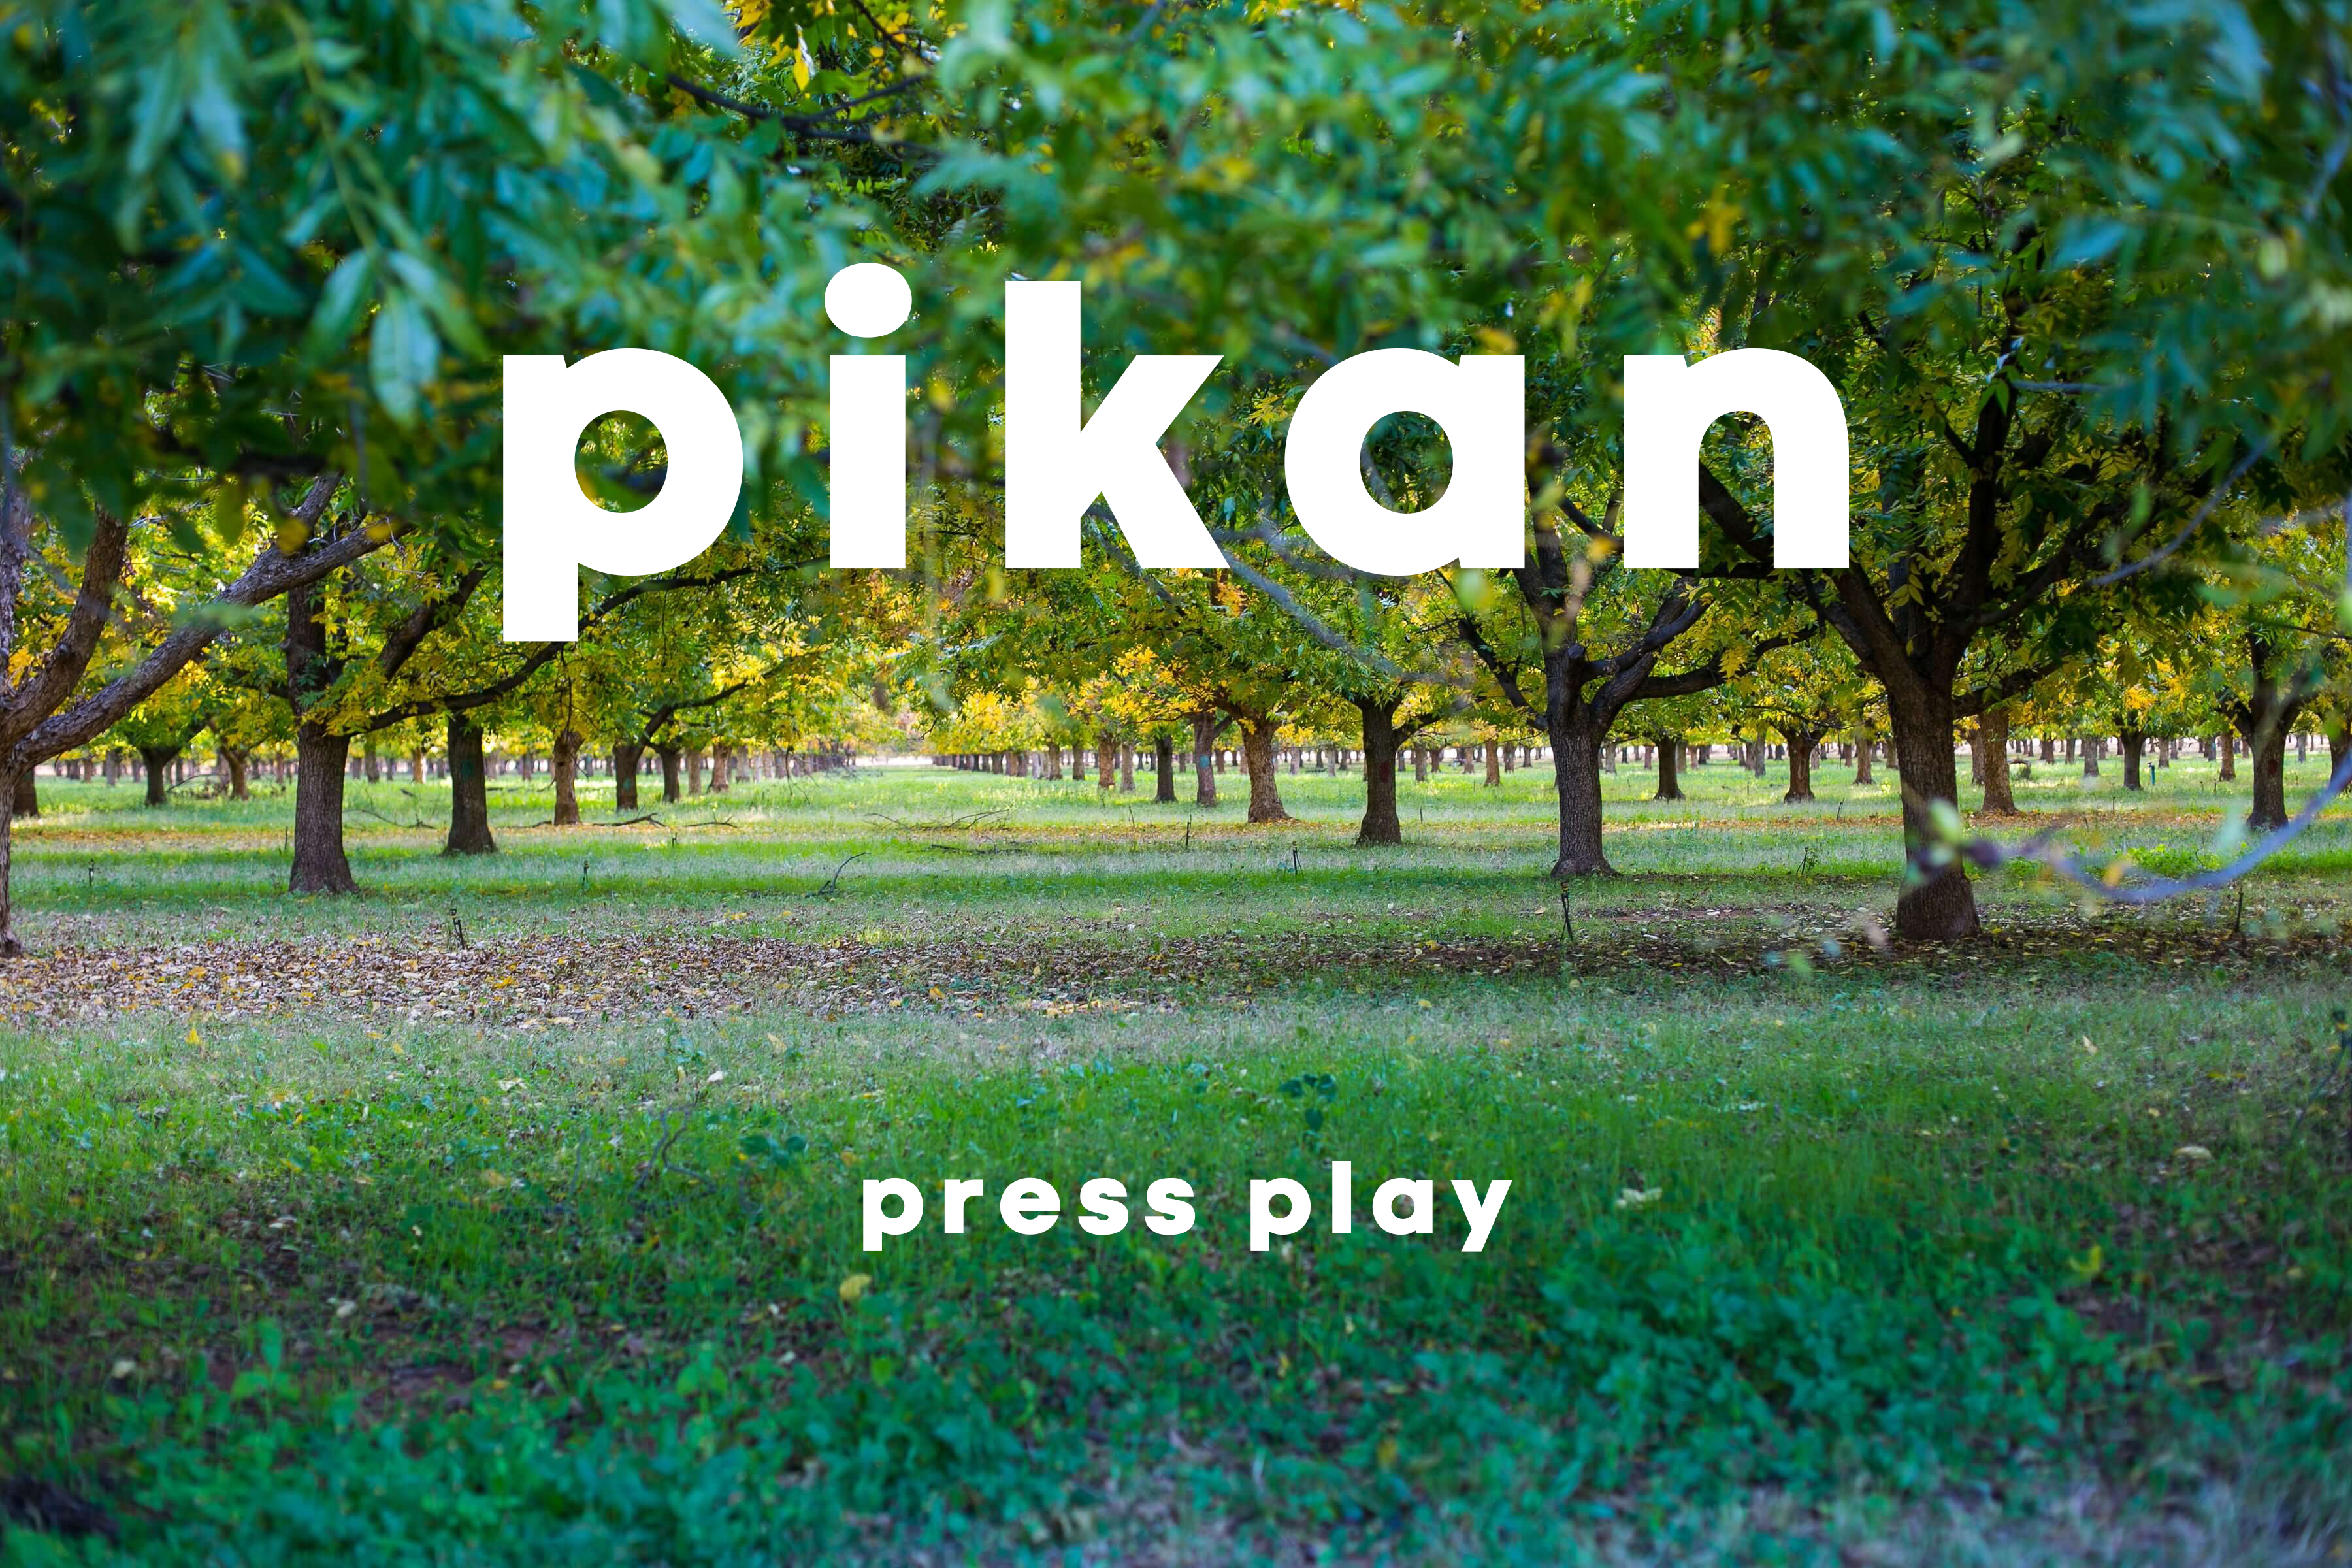 Load video: Pecans Nuts by Pikan, Video about Raw Pecan Nuts